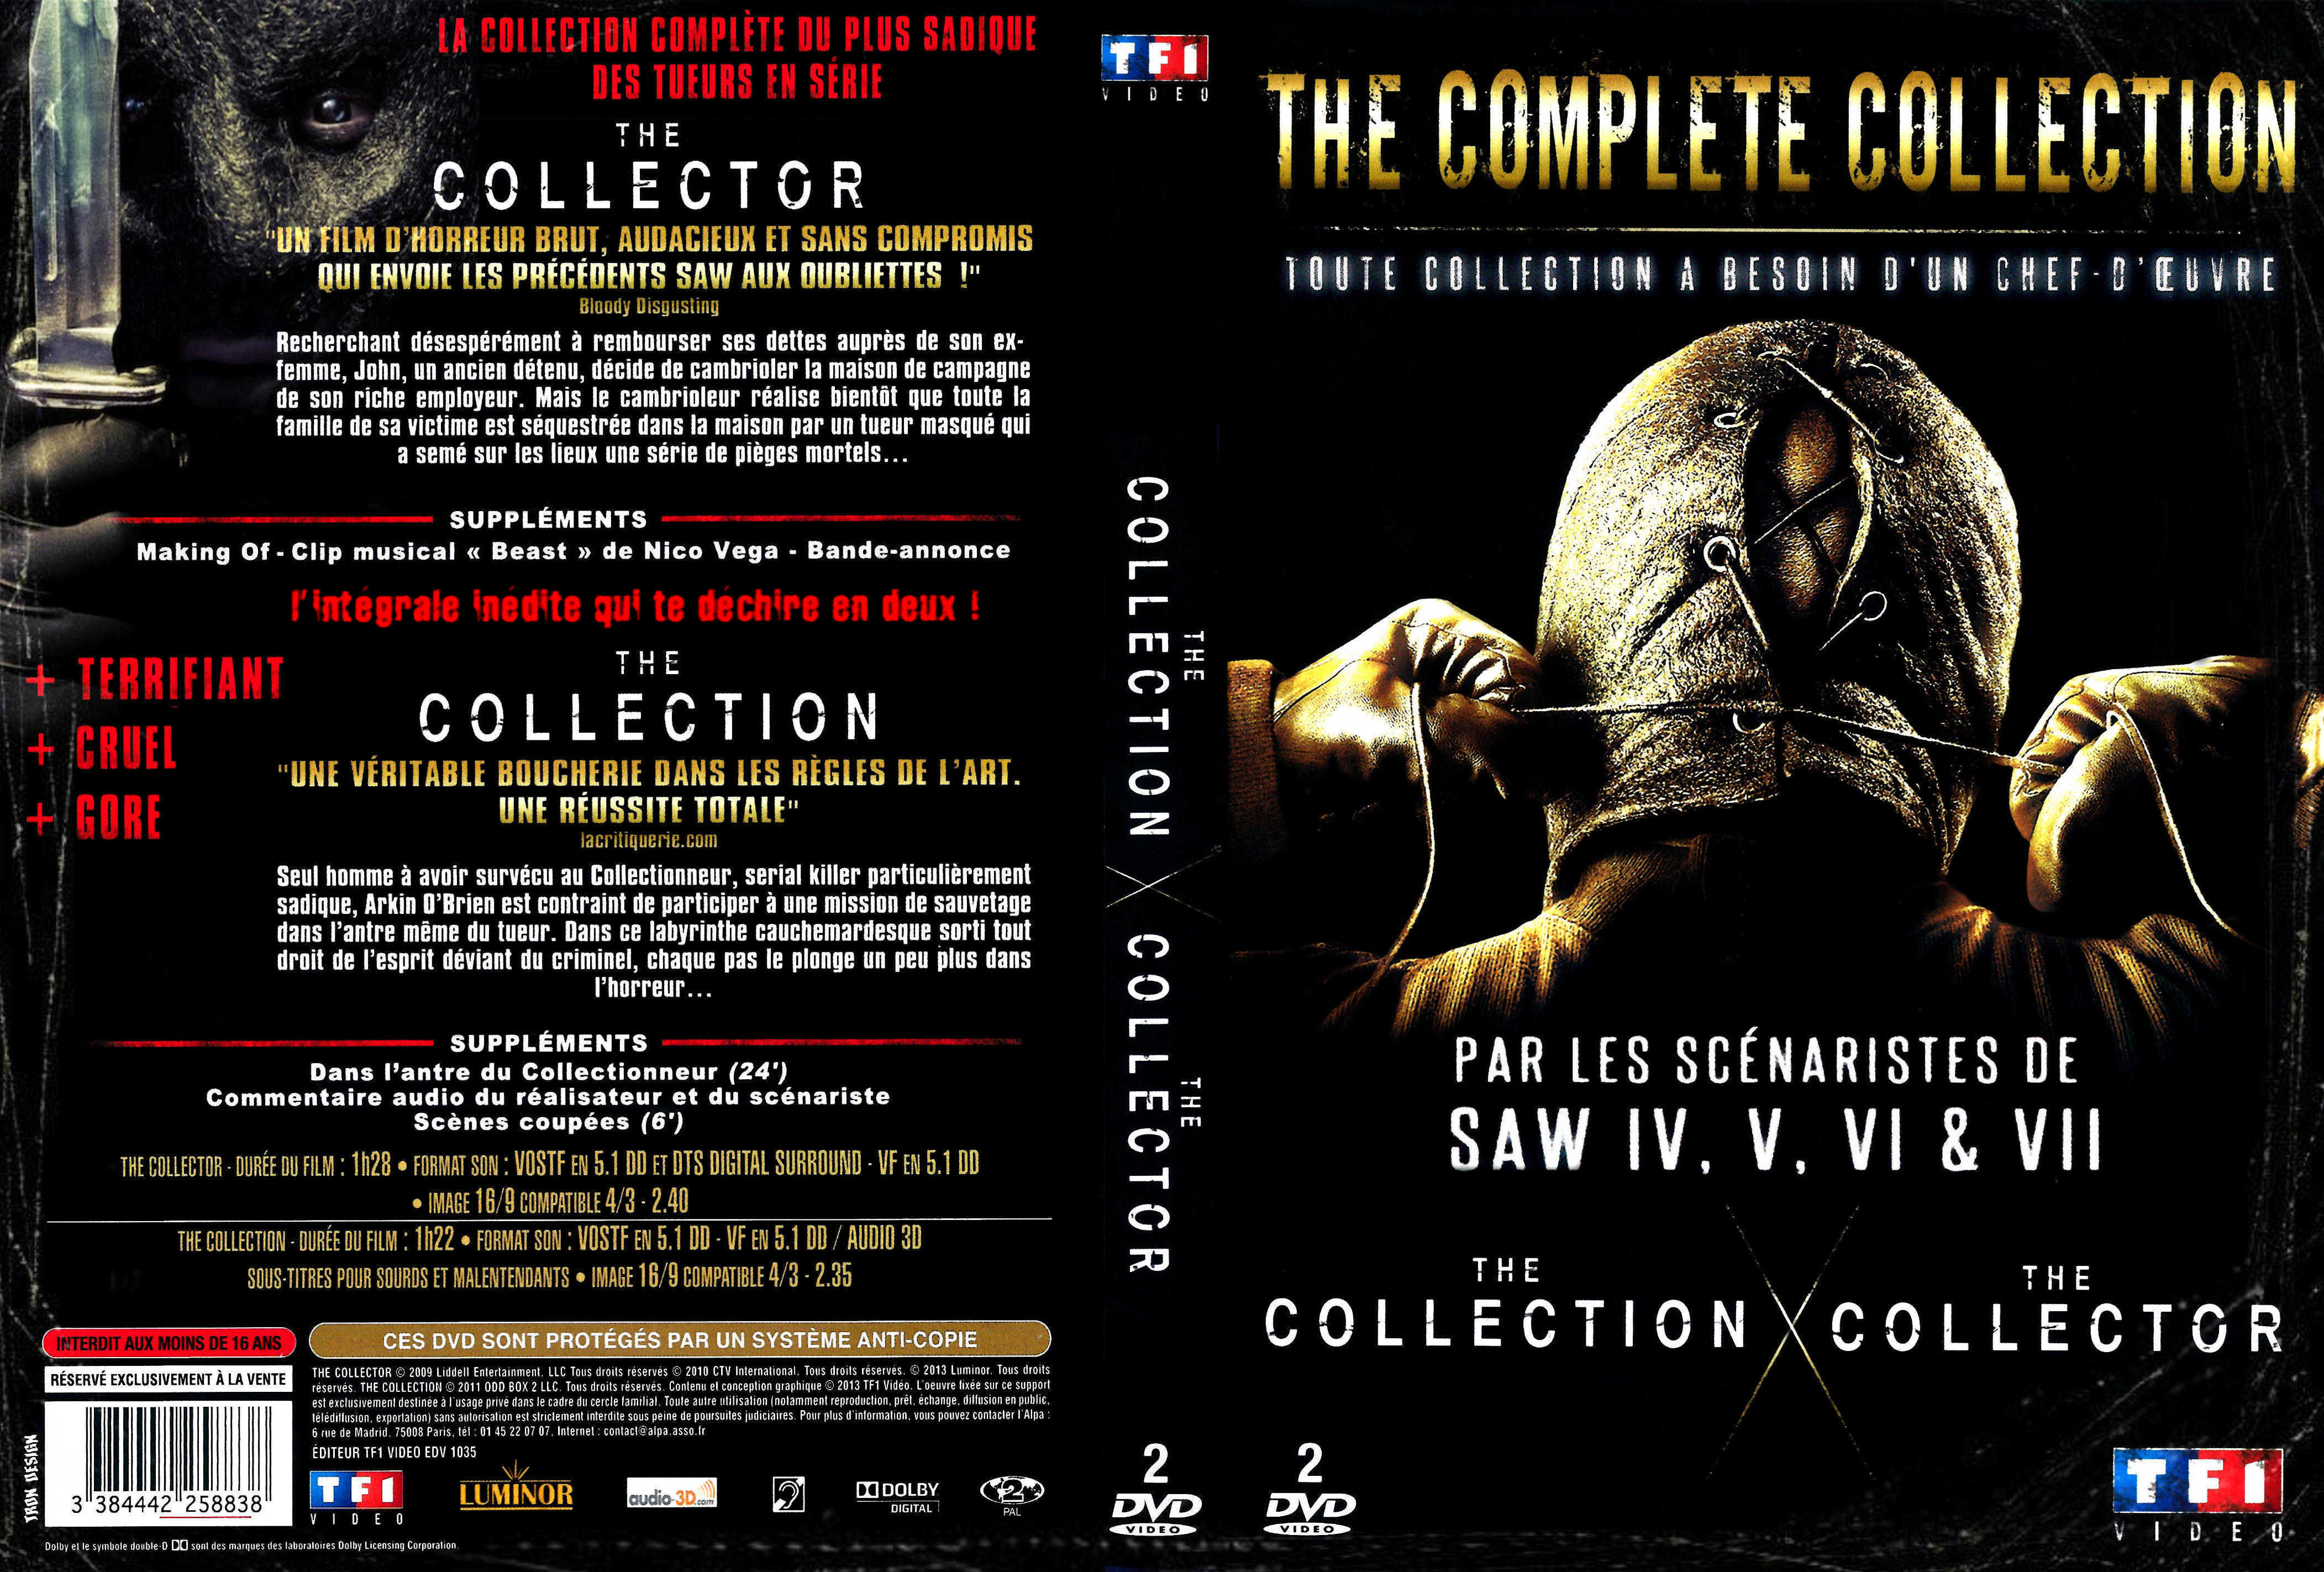 Jaquette DVD The collector & The collection custom